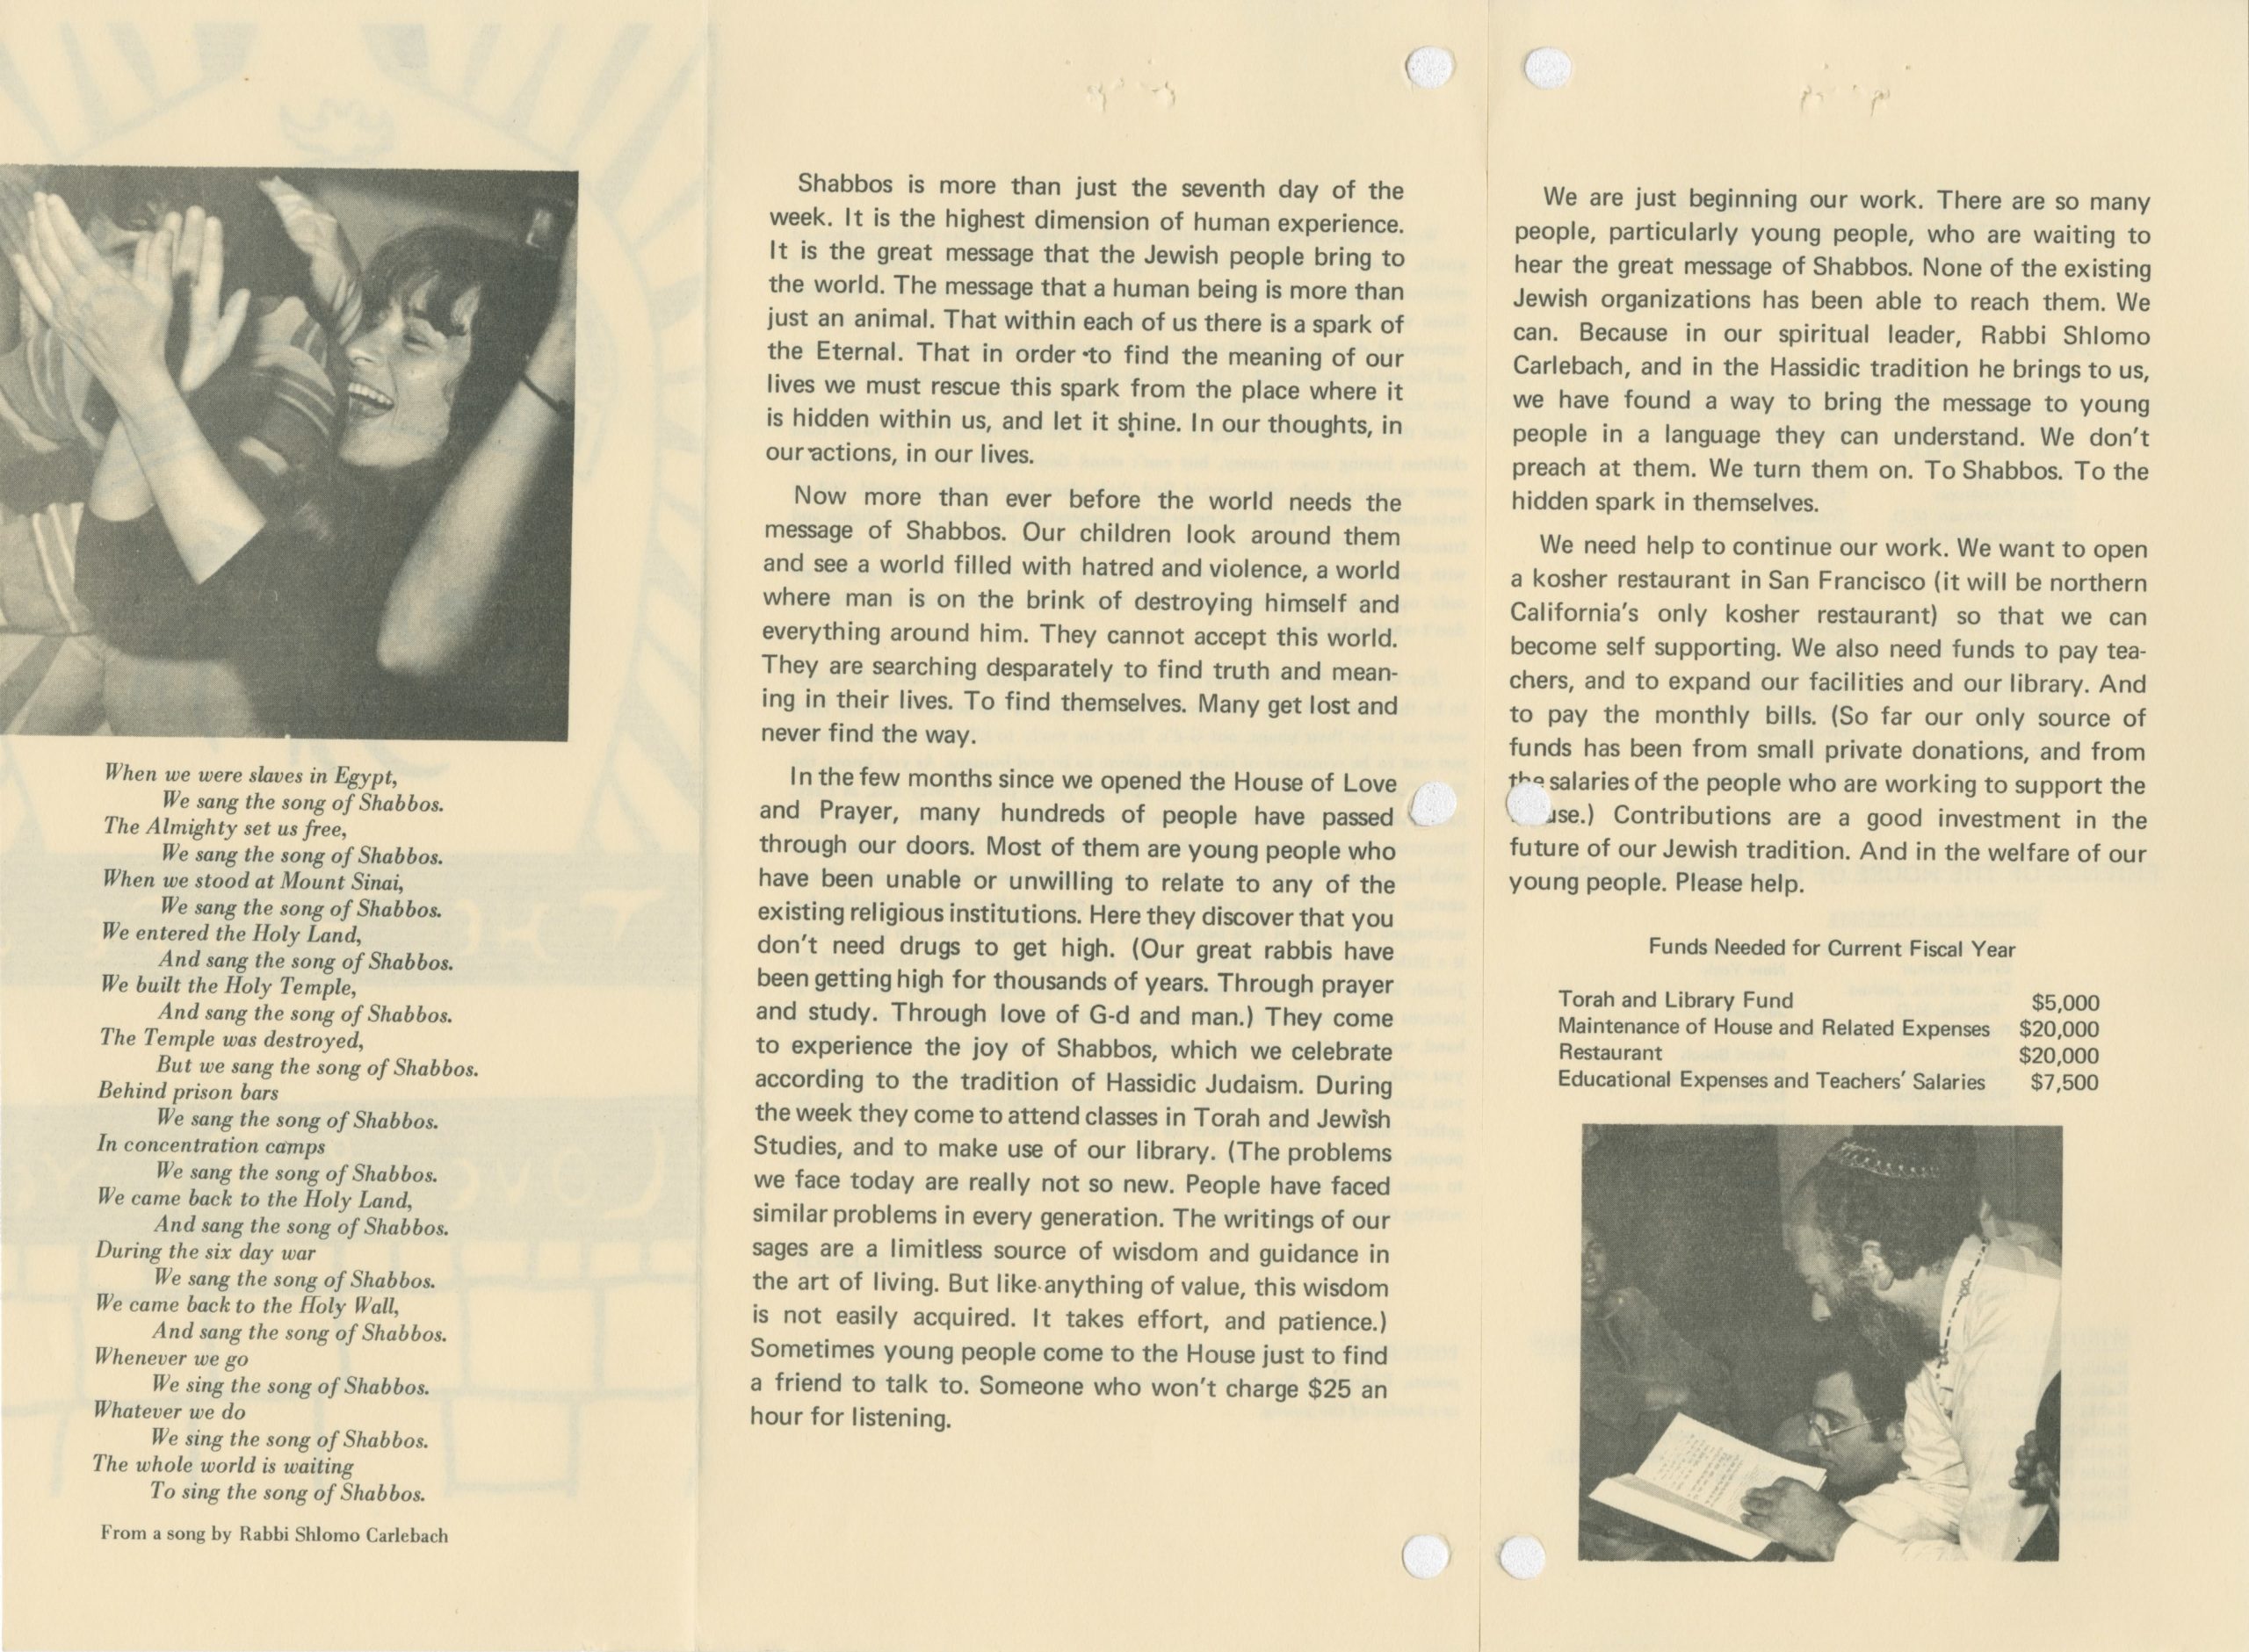 The second part of a brochure advertising the House of Love and Prayer, 1968
